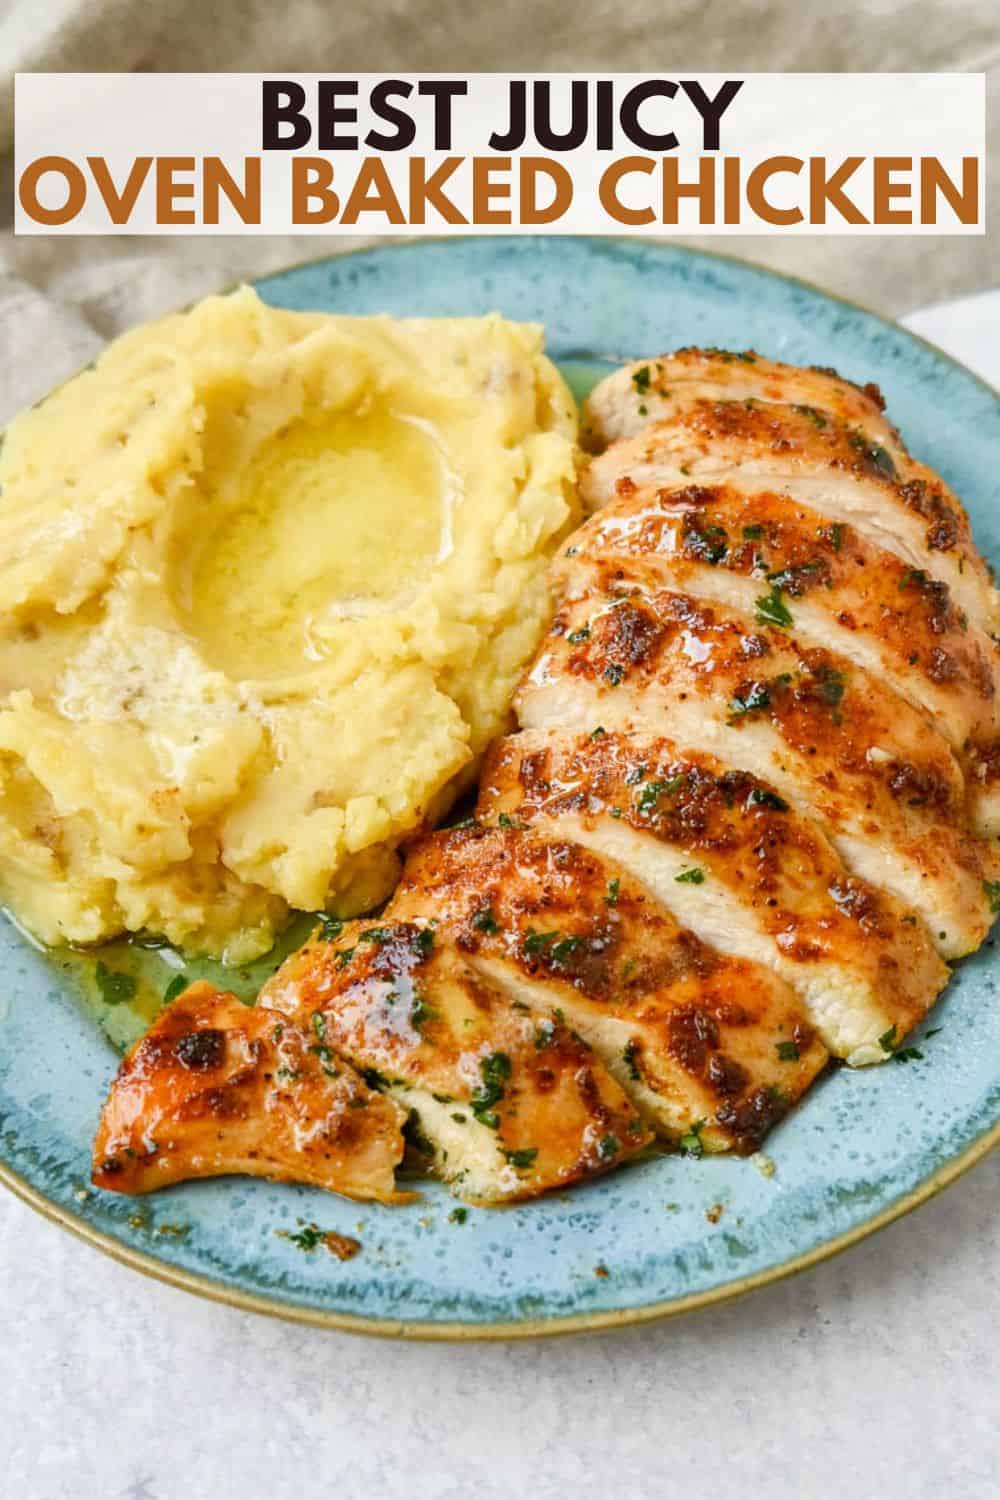 This is the easiest baked chicken recipe that is so flavorful and juicy. This homemade spice rub is perfect for oven baked chicken and makes it perfectly spiced. I am sharing my tips for making the best baked chicken.